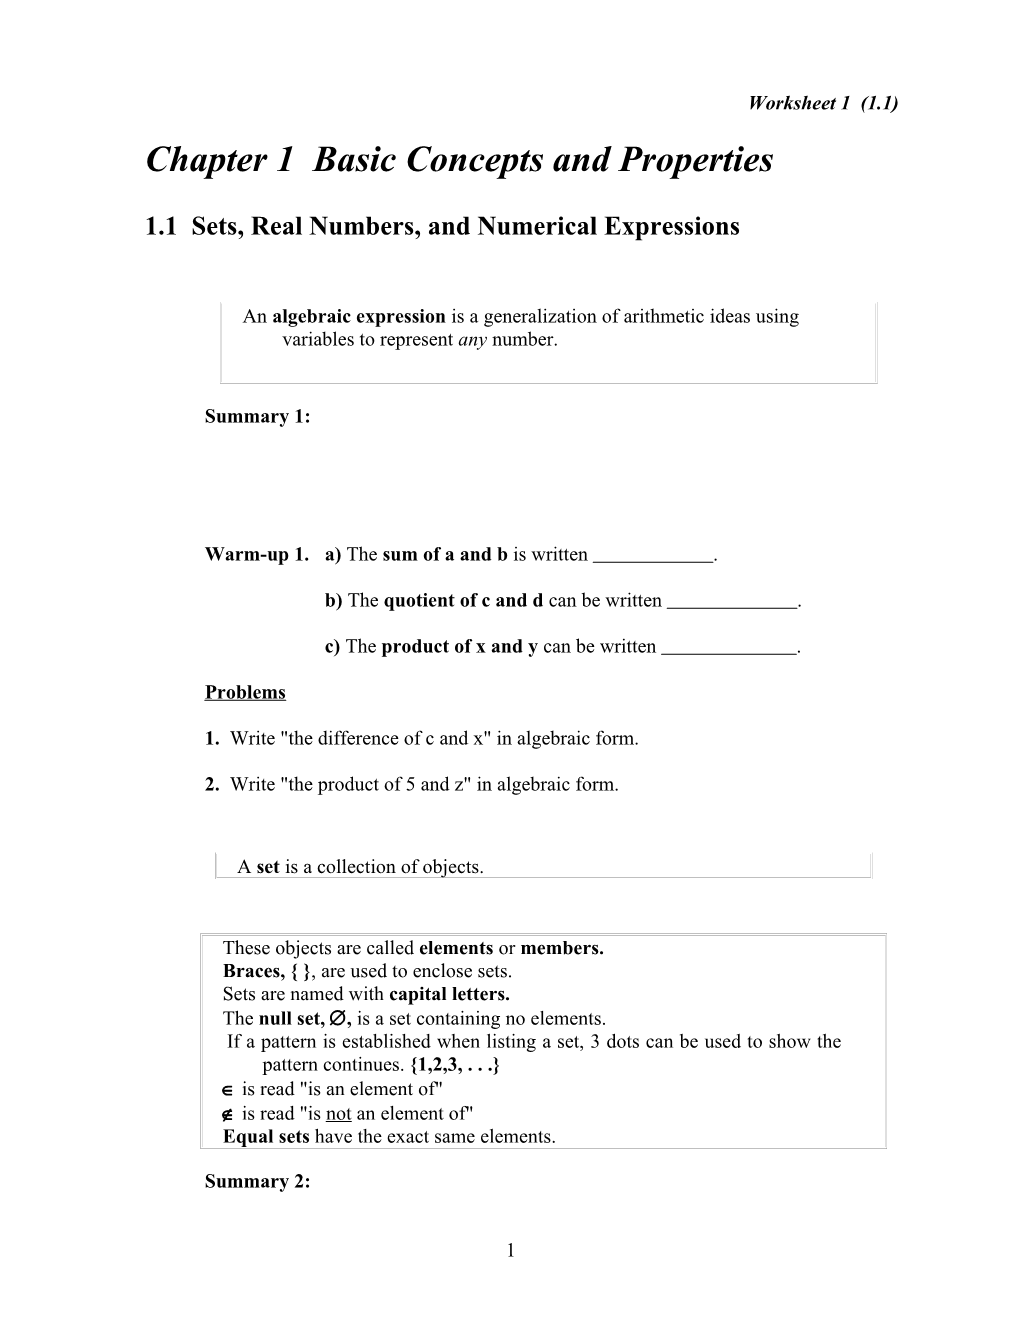 Chapter 1 Basic Concepts and Properties